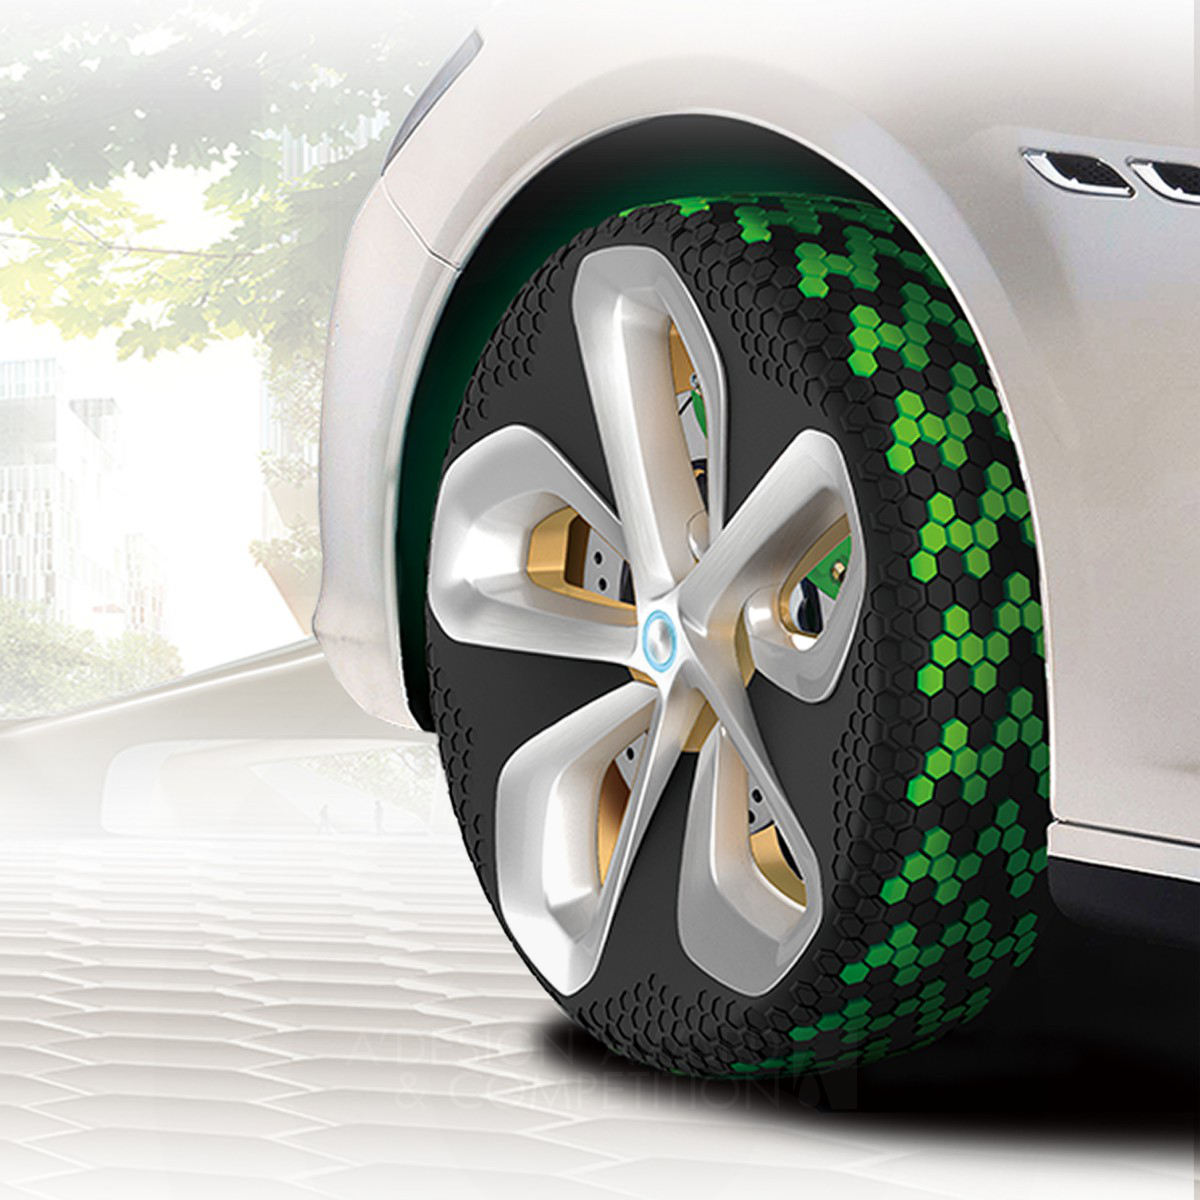 Green Hive: A Sustainable and Innovative Tire Design